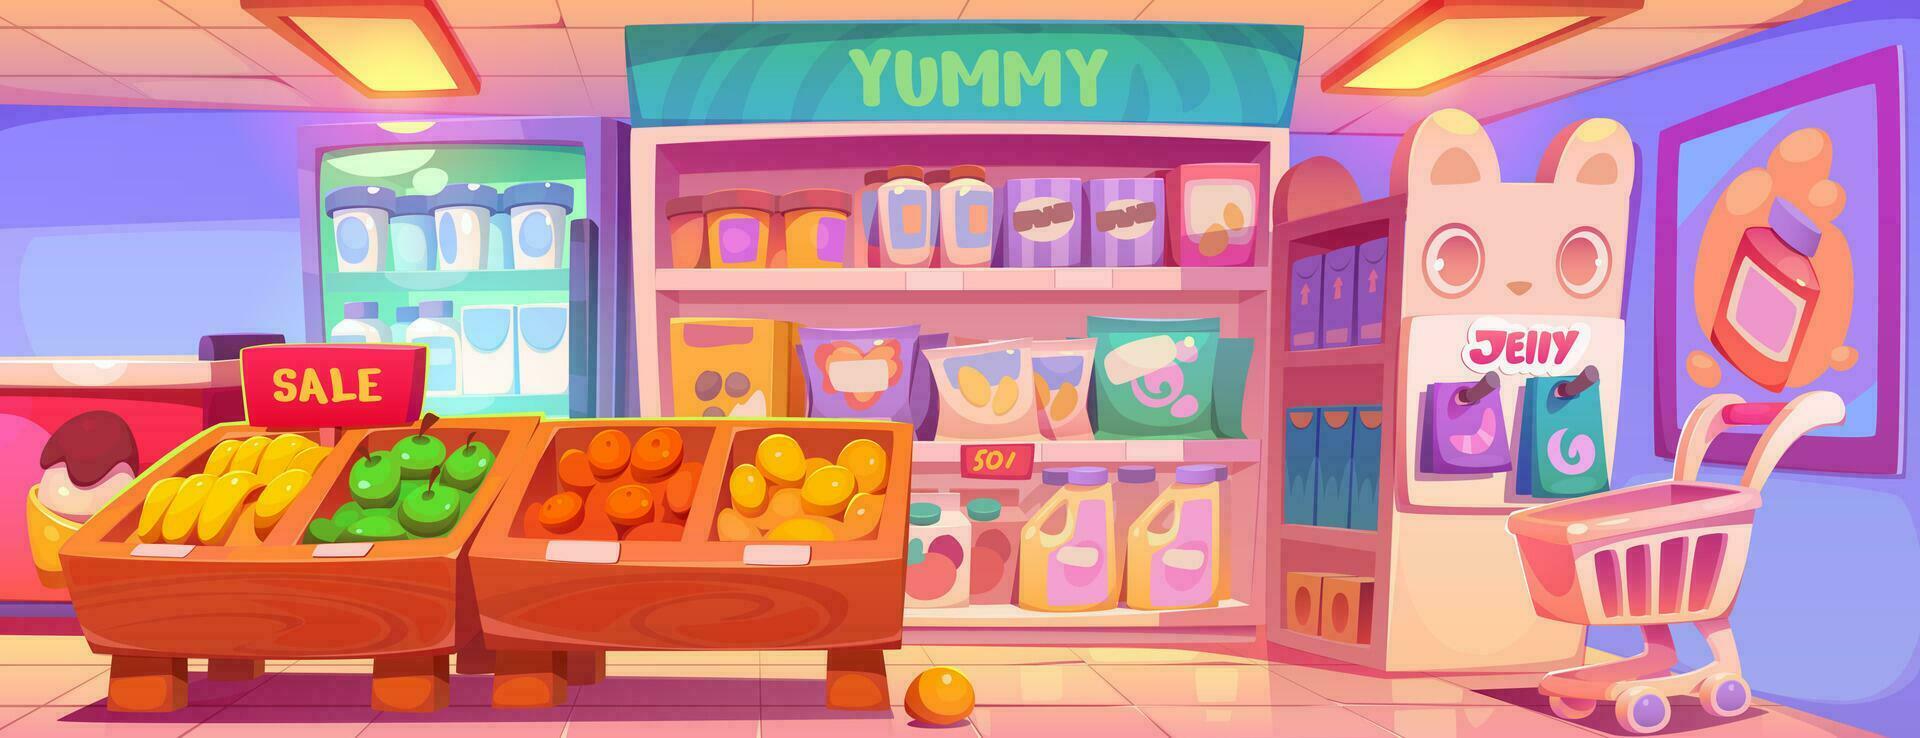 Cartoon grocery store with kawaii style goods vector